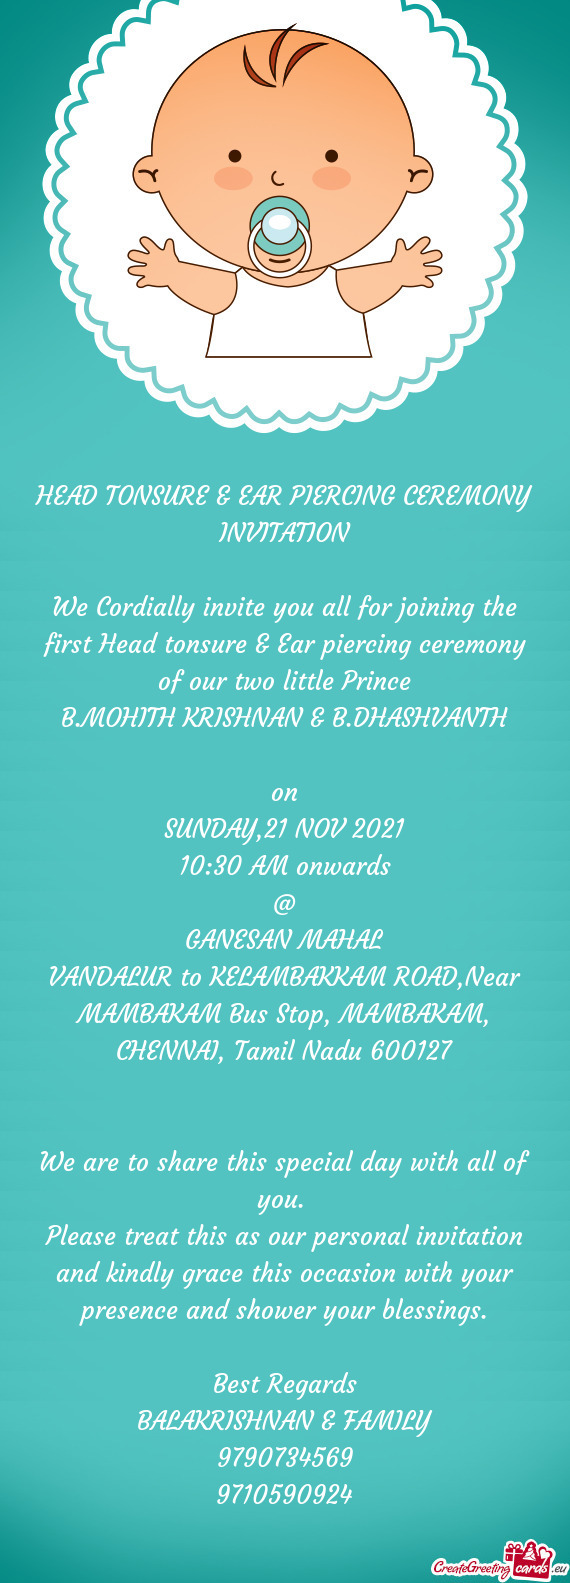 We Cordially invite you all for joining the first Head tonsure & Ear piercing ceremony of our two li